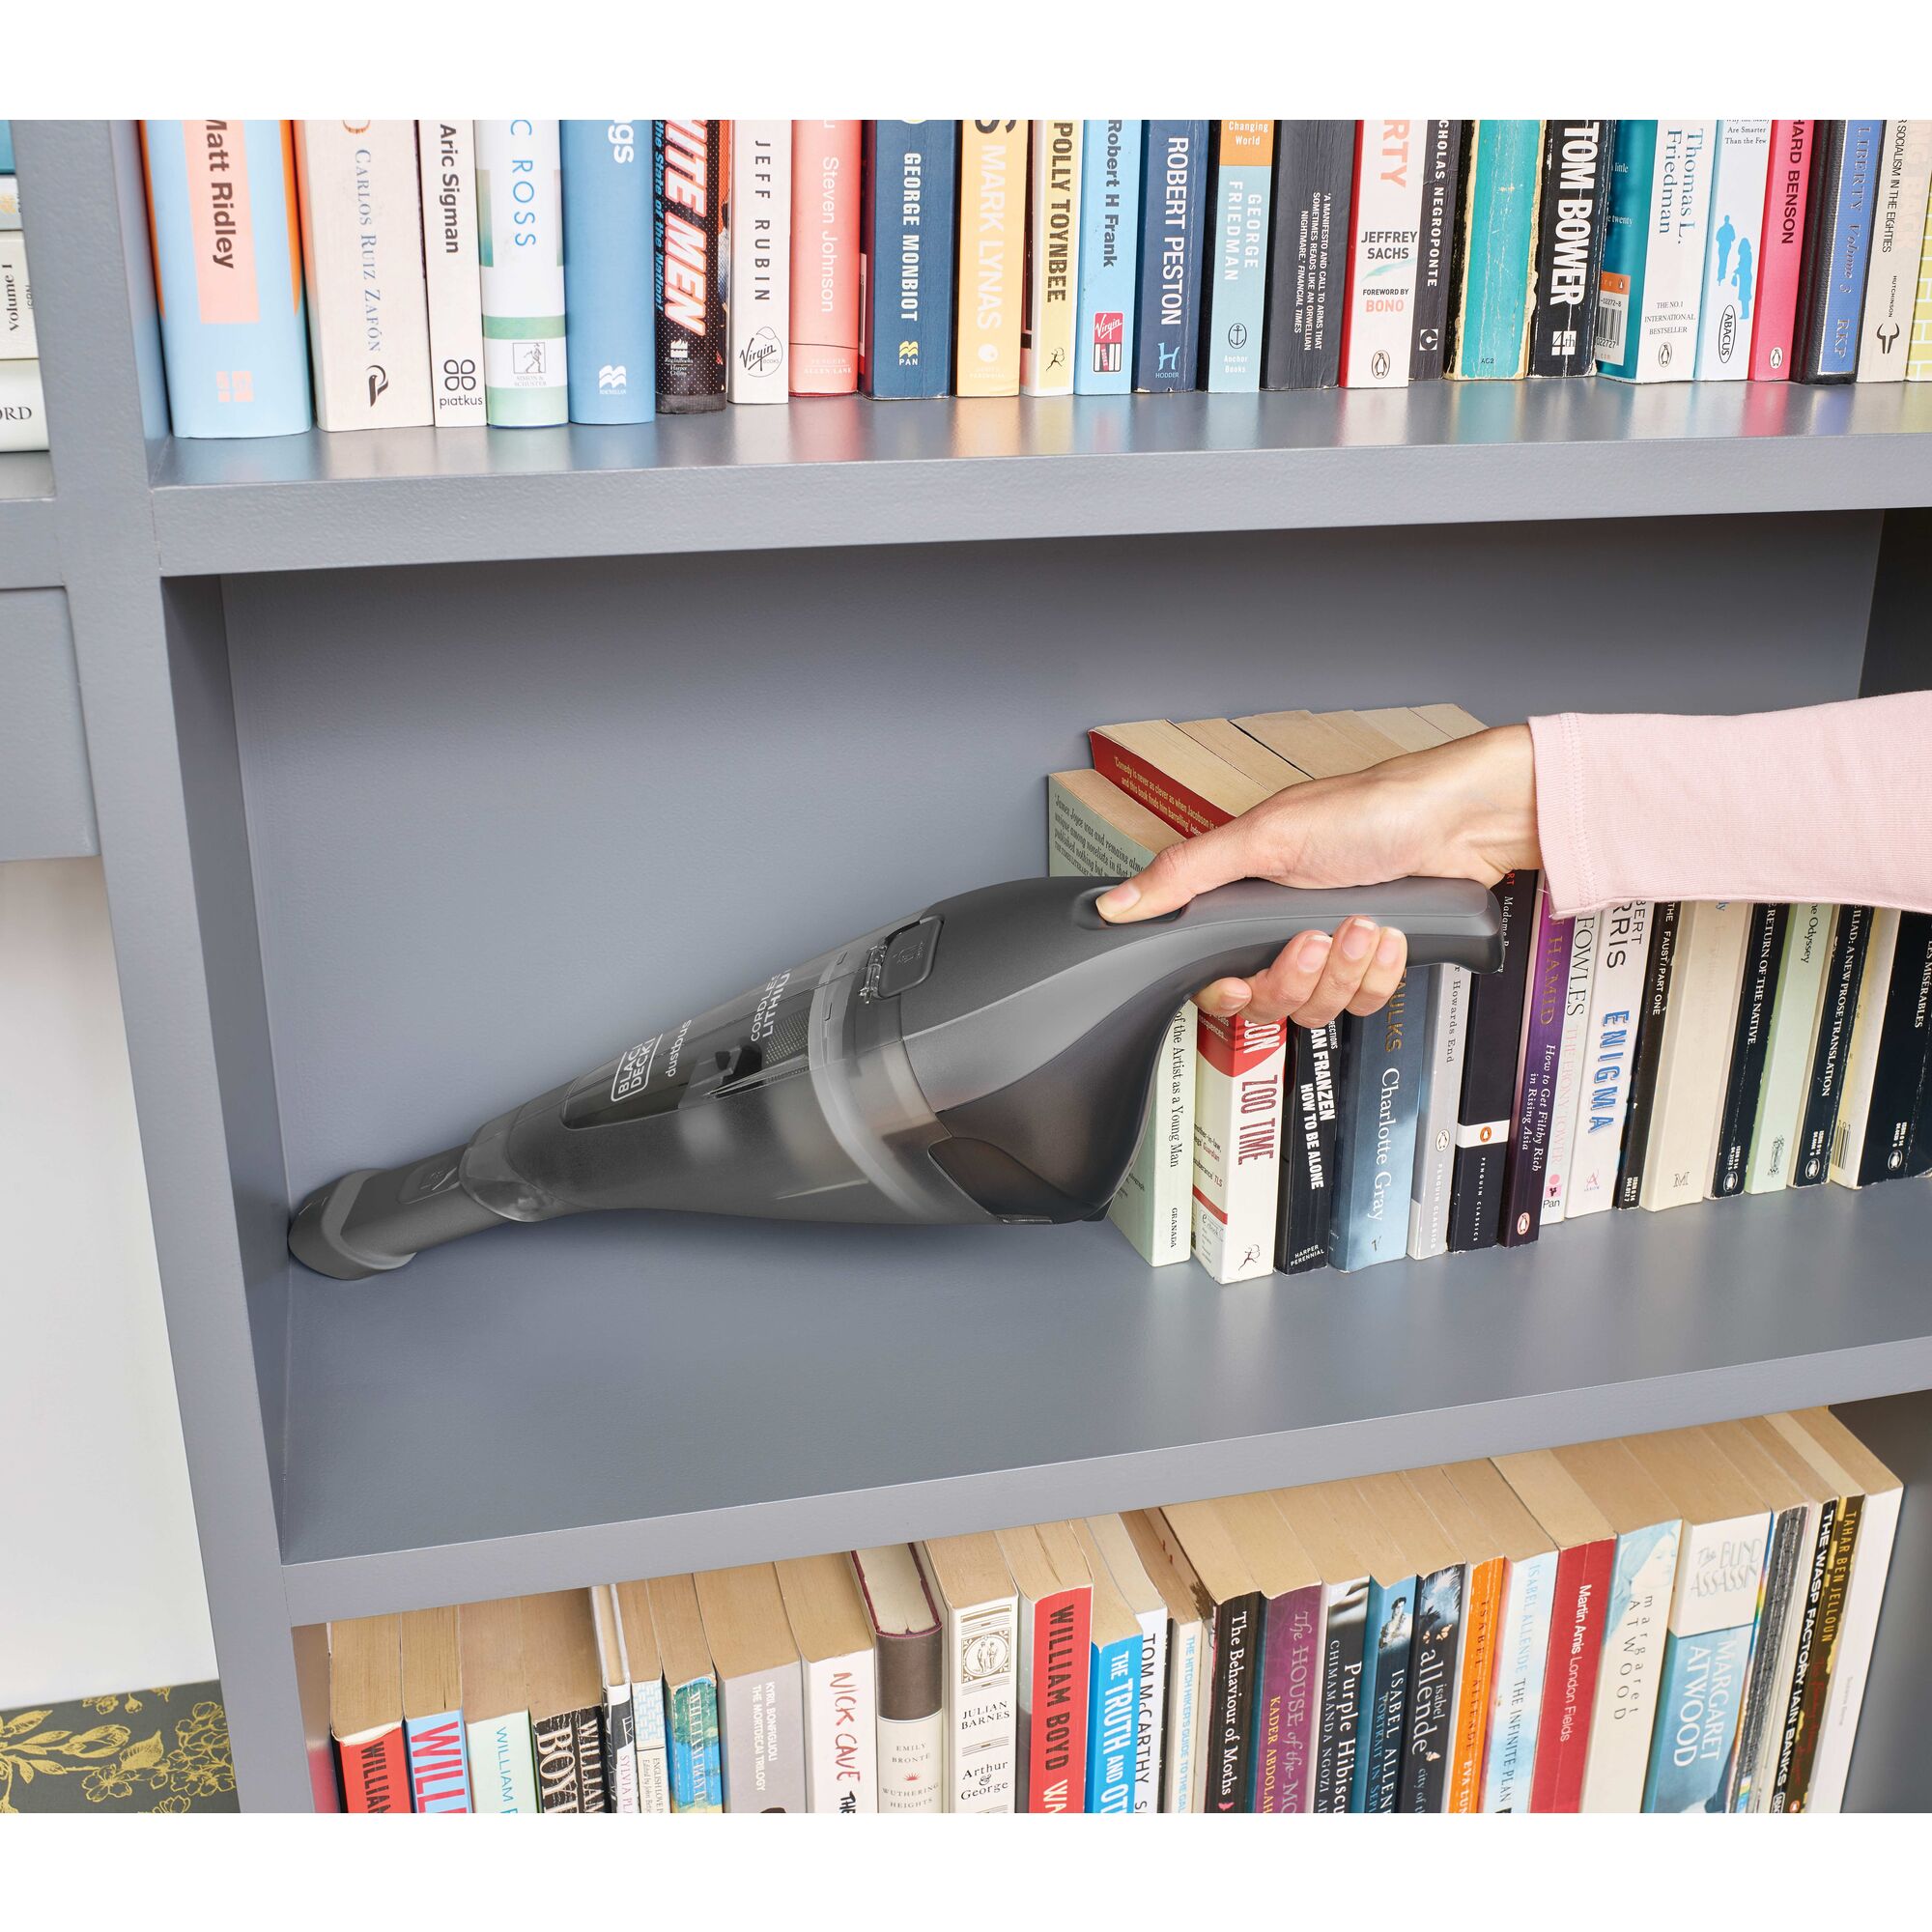 Person cleaning bookshelf with dustbuster handheld vacuum